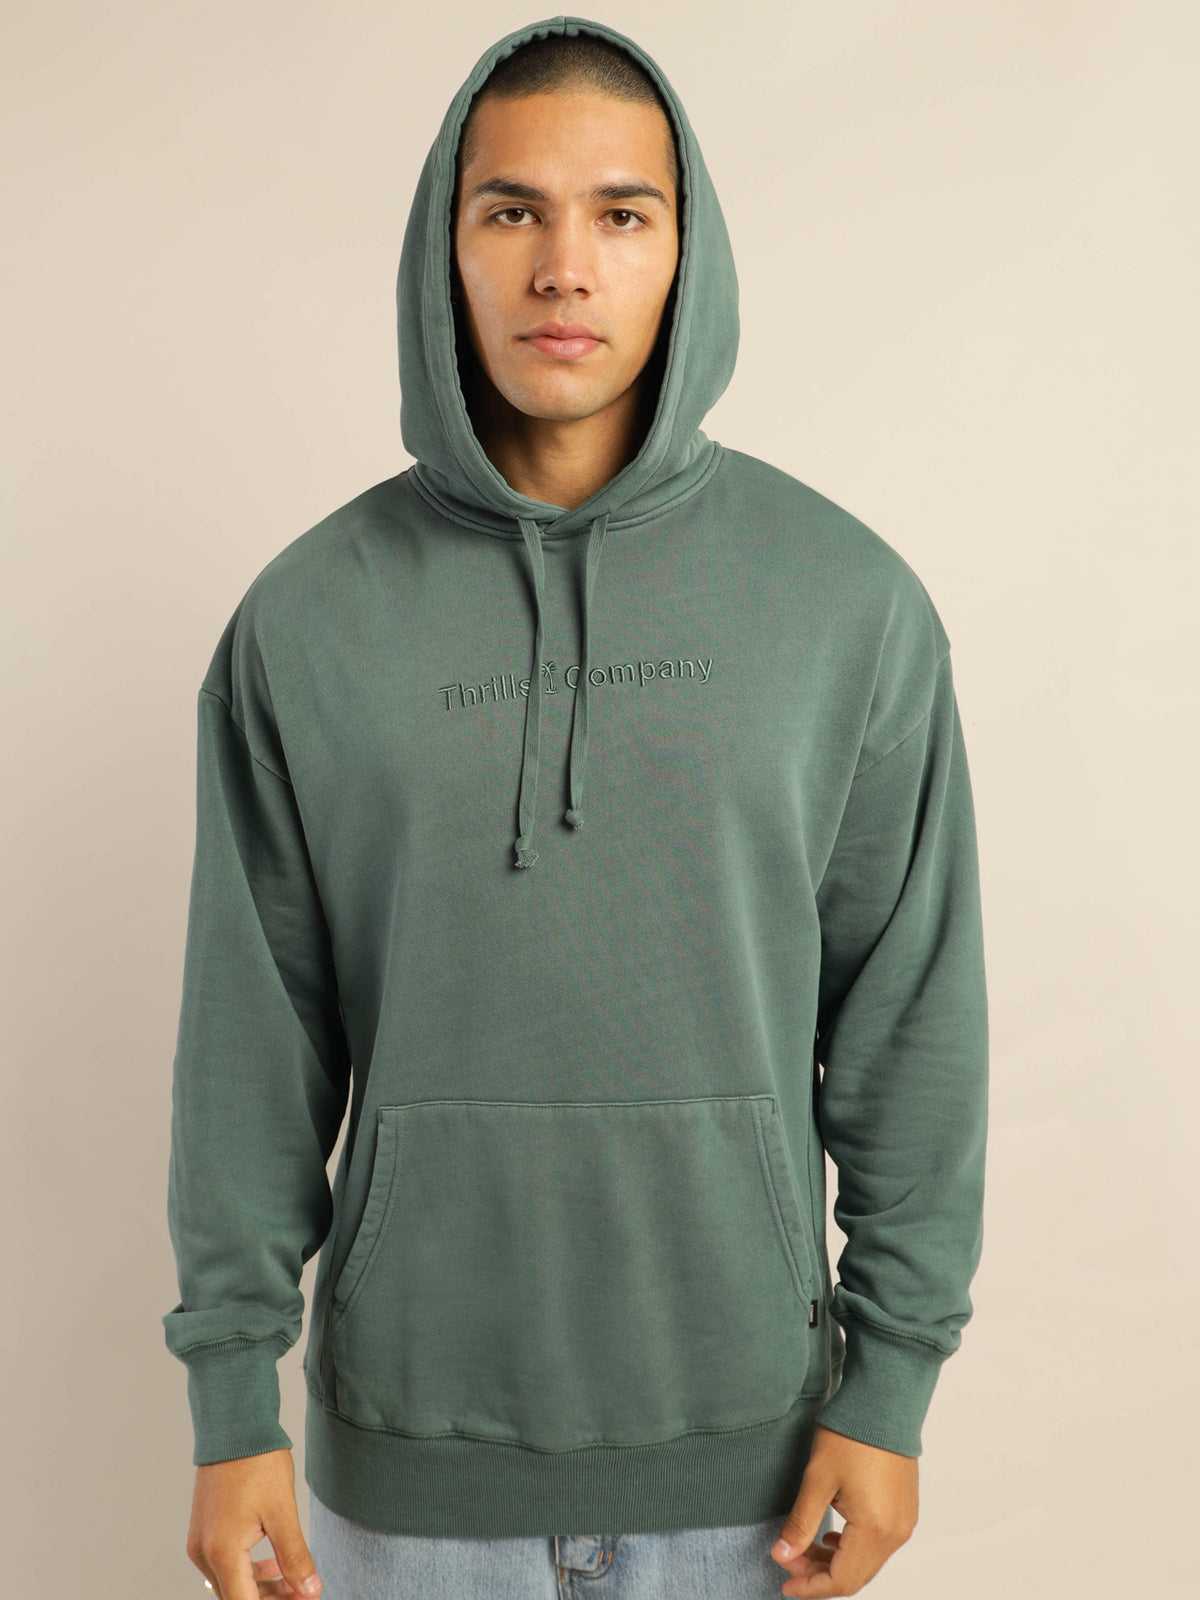 Tonal Company Slouch Hood in Vintage Teal